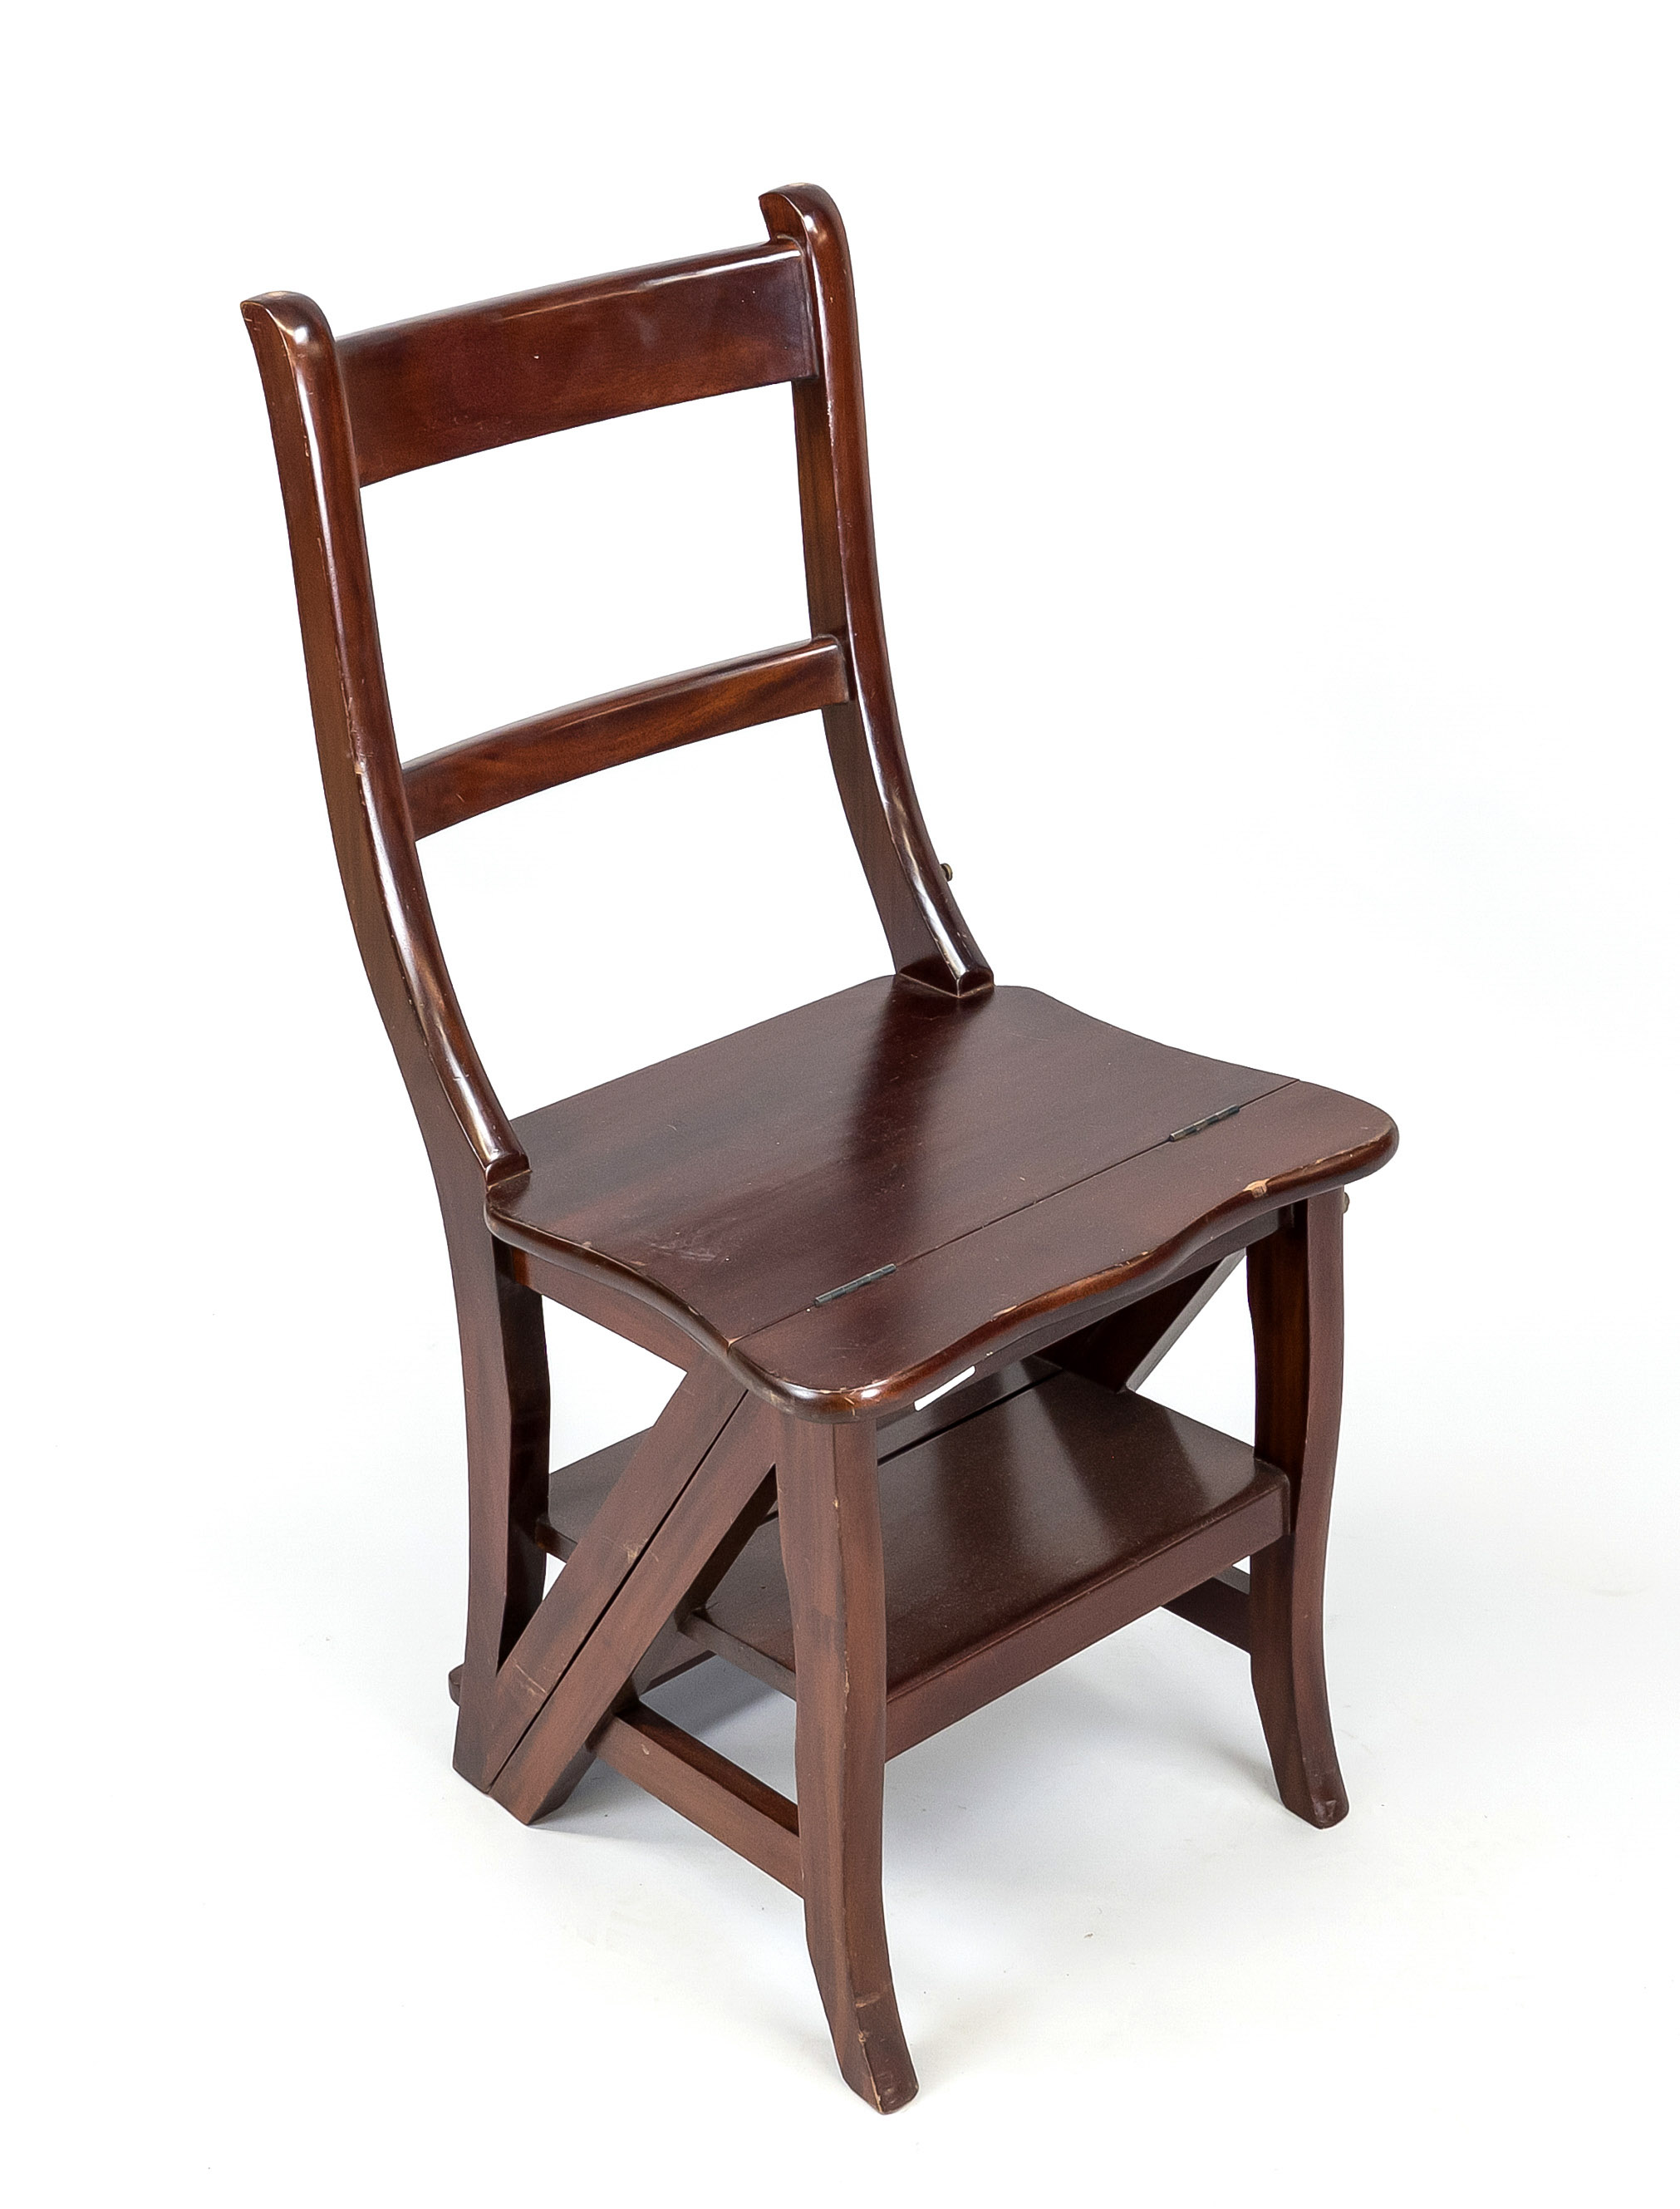 Ladder chair, 20th century, mahogany. Folded out 4 steps, slightly rubbed & bumped, h. max 88 cm